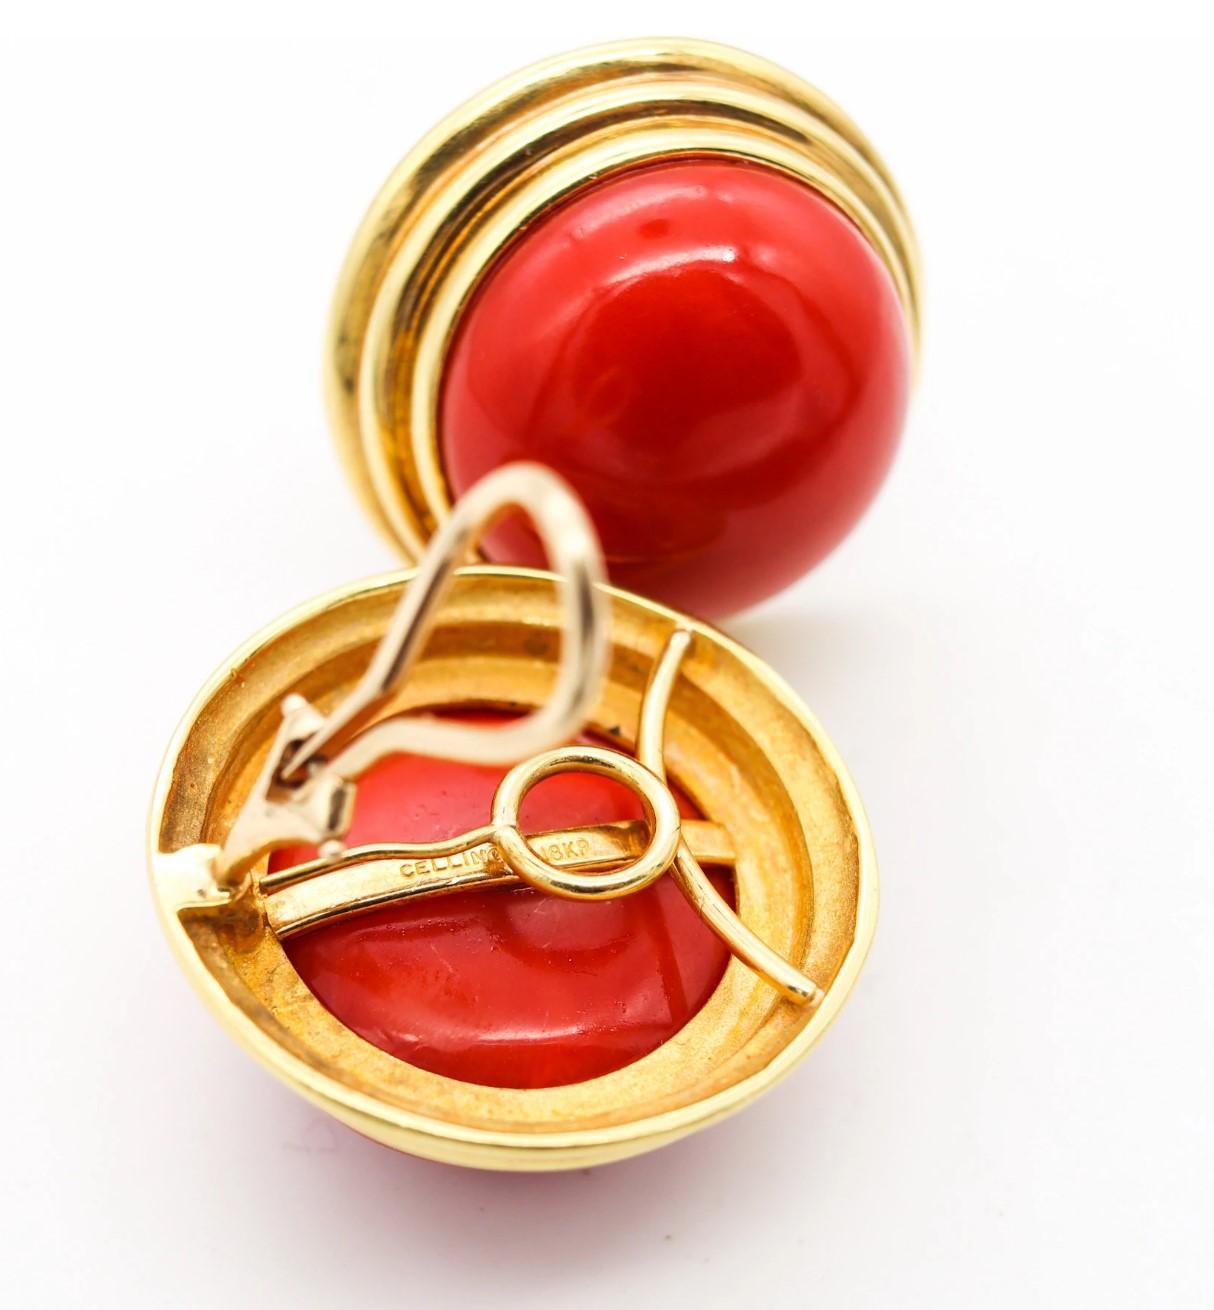 Modernist Cellino 1970 Italy Massive Earrings in 18Kt Gold 70.2 Ctw Sardinian Red Coral For Sale